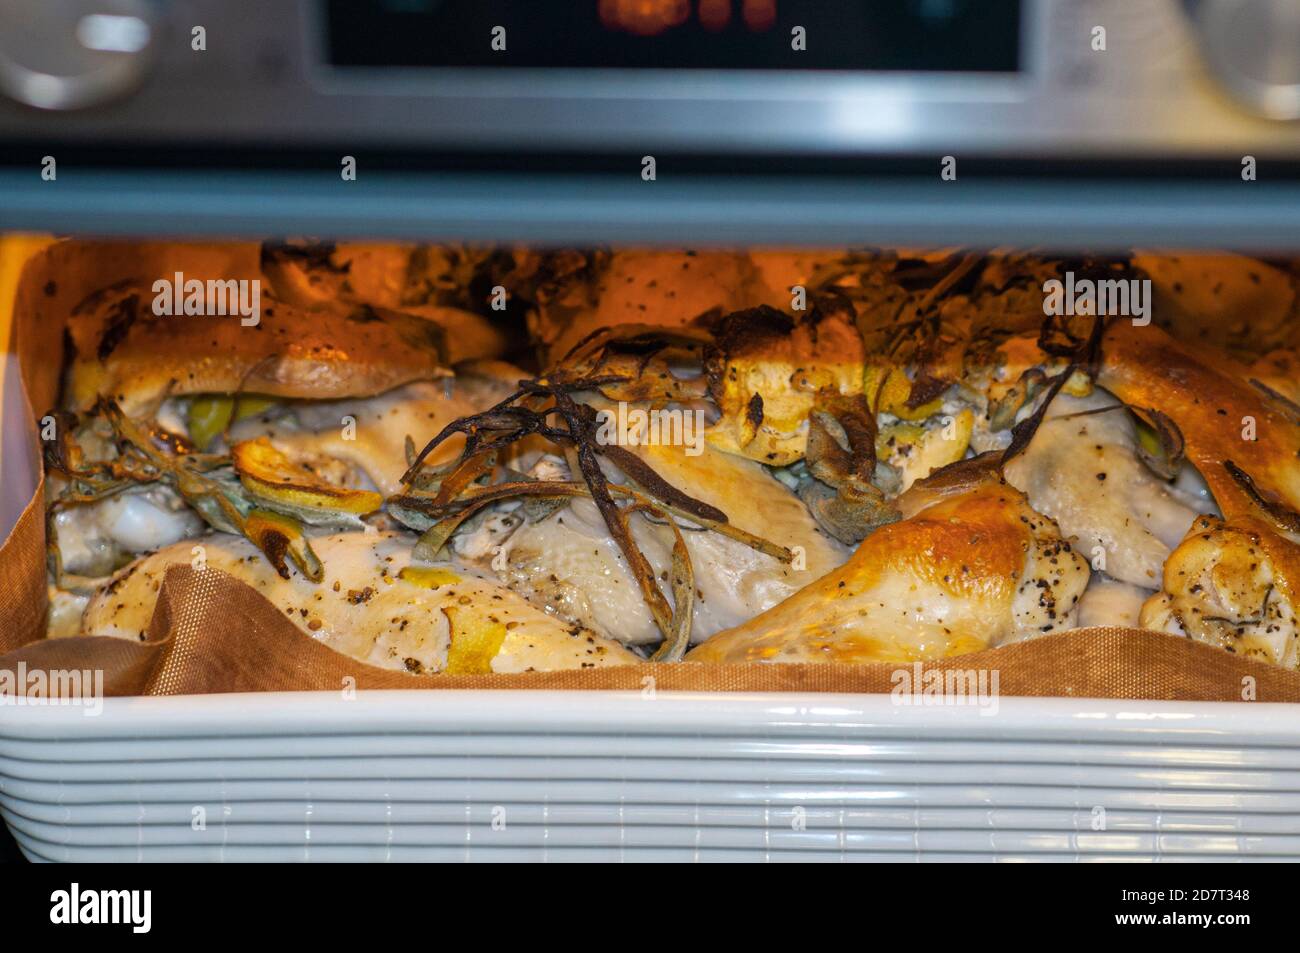 Chicken grilling in an oven with sage and lemon peels Stock Photo